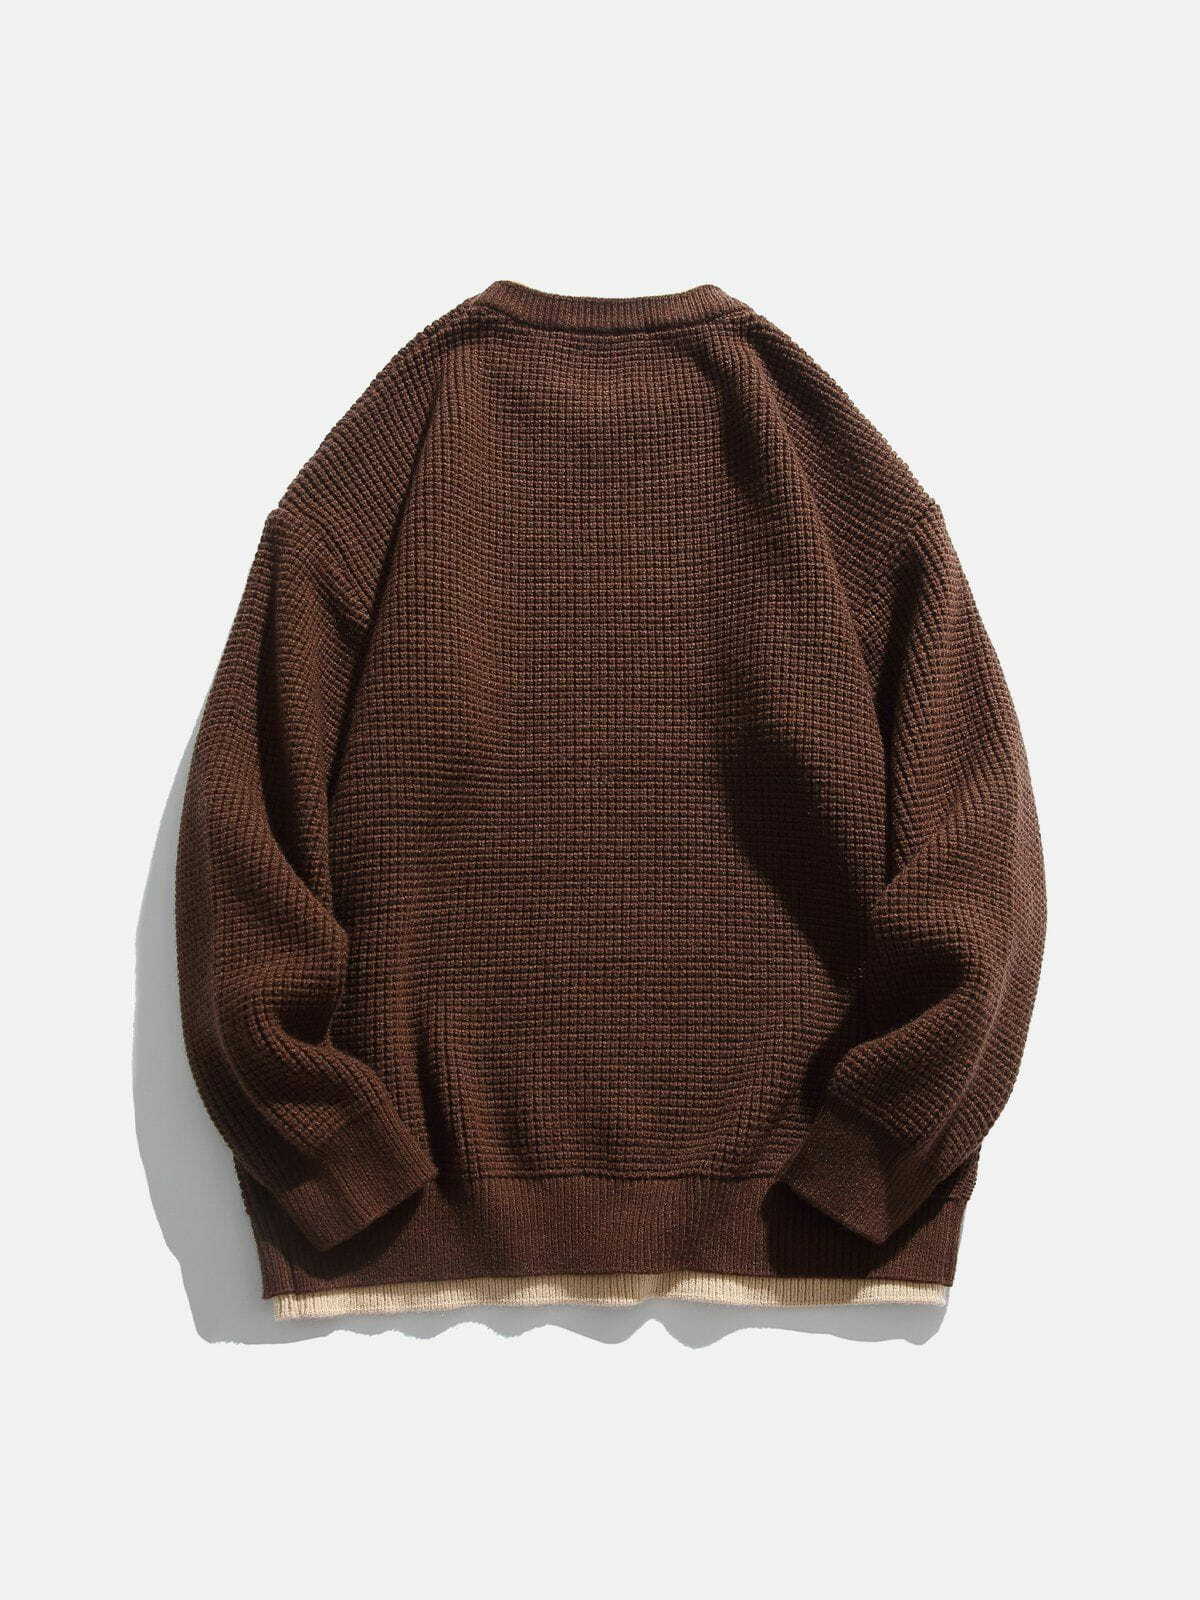 unique duallayer waffle sweater edgy & trendy streetwear 2464